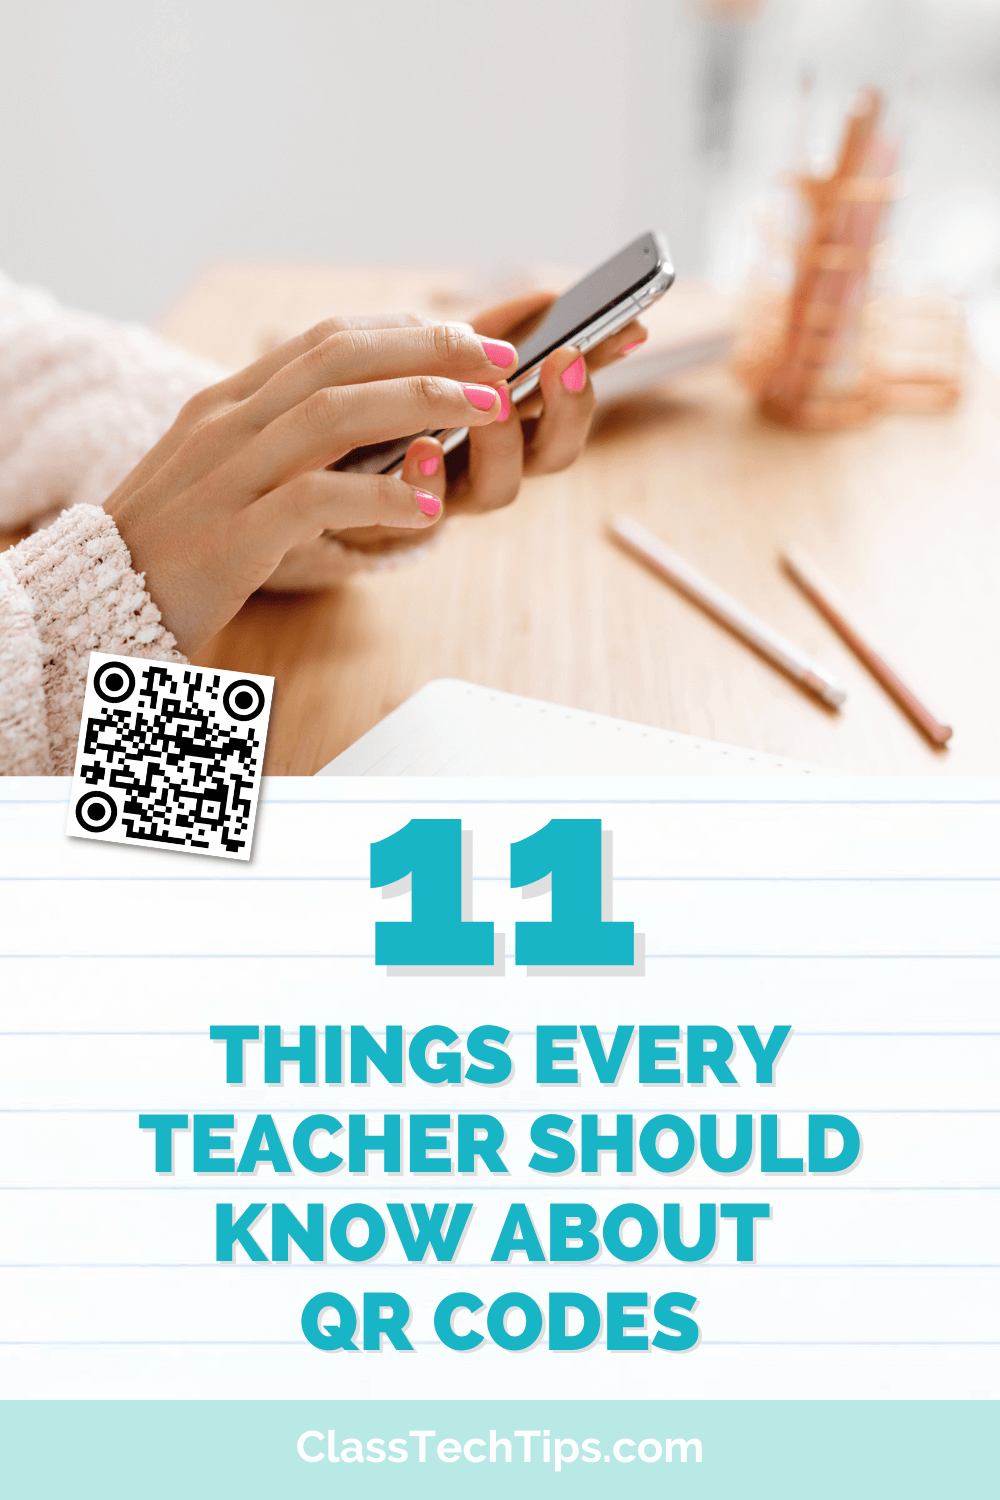 Image of teacher hands holding a smartphone, with a QR code and the text "11 Things Every Teacher Should Know About QR Codes."